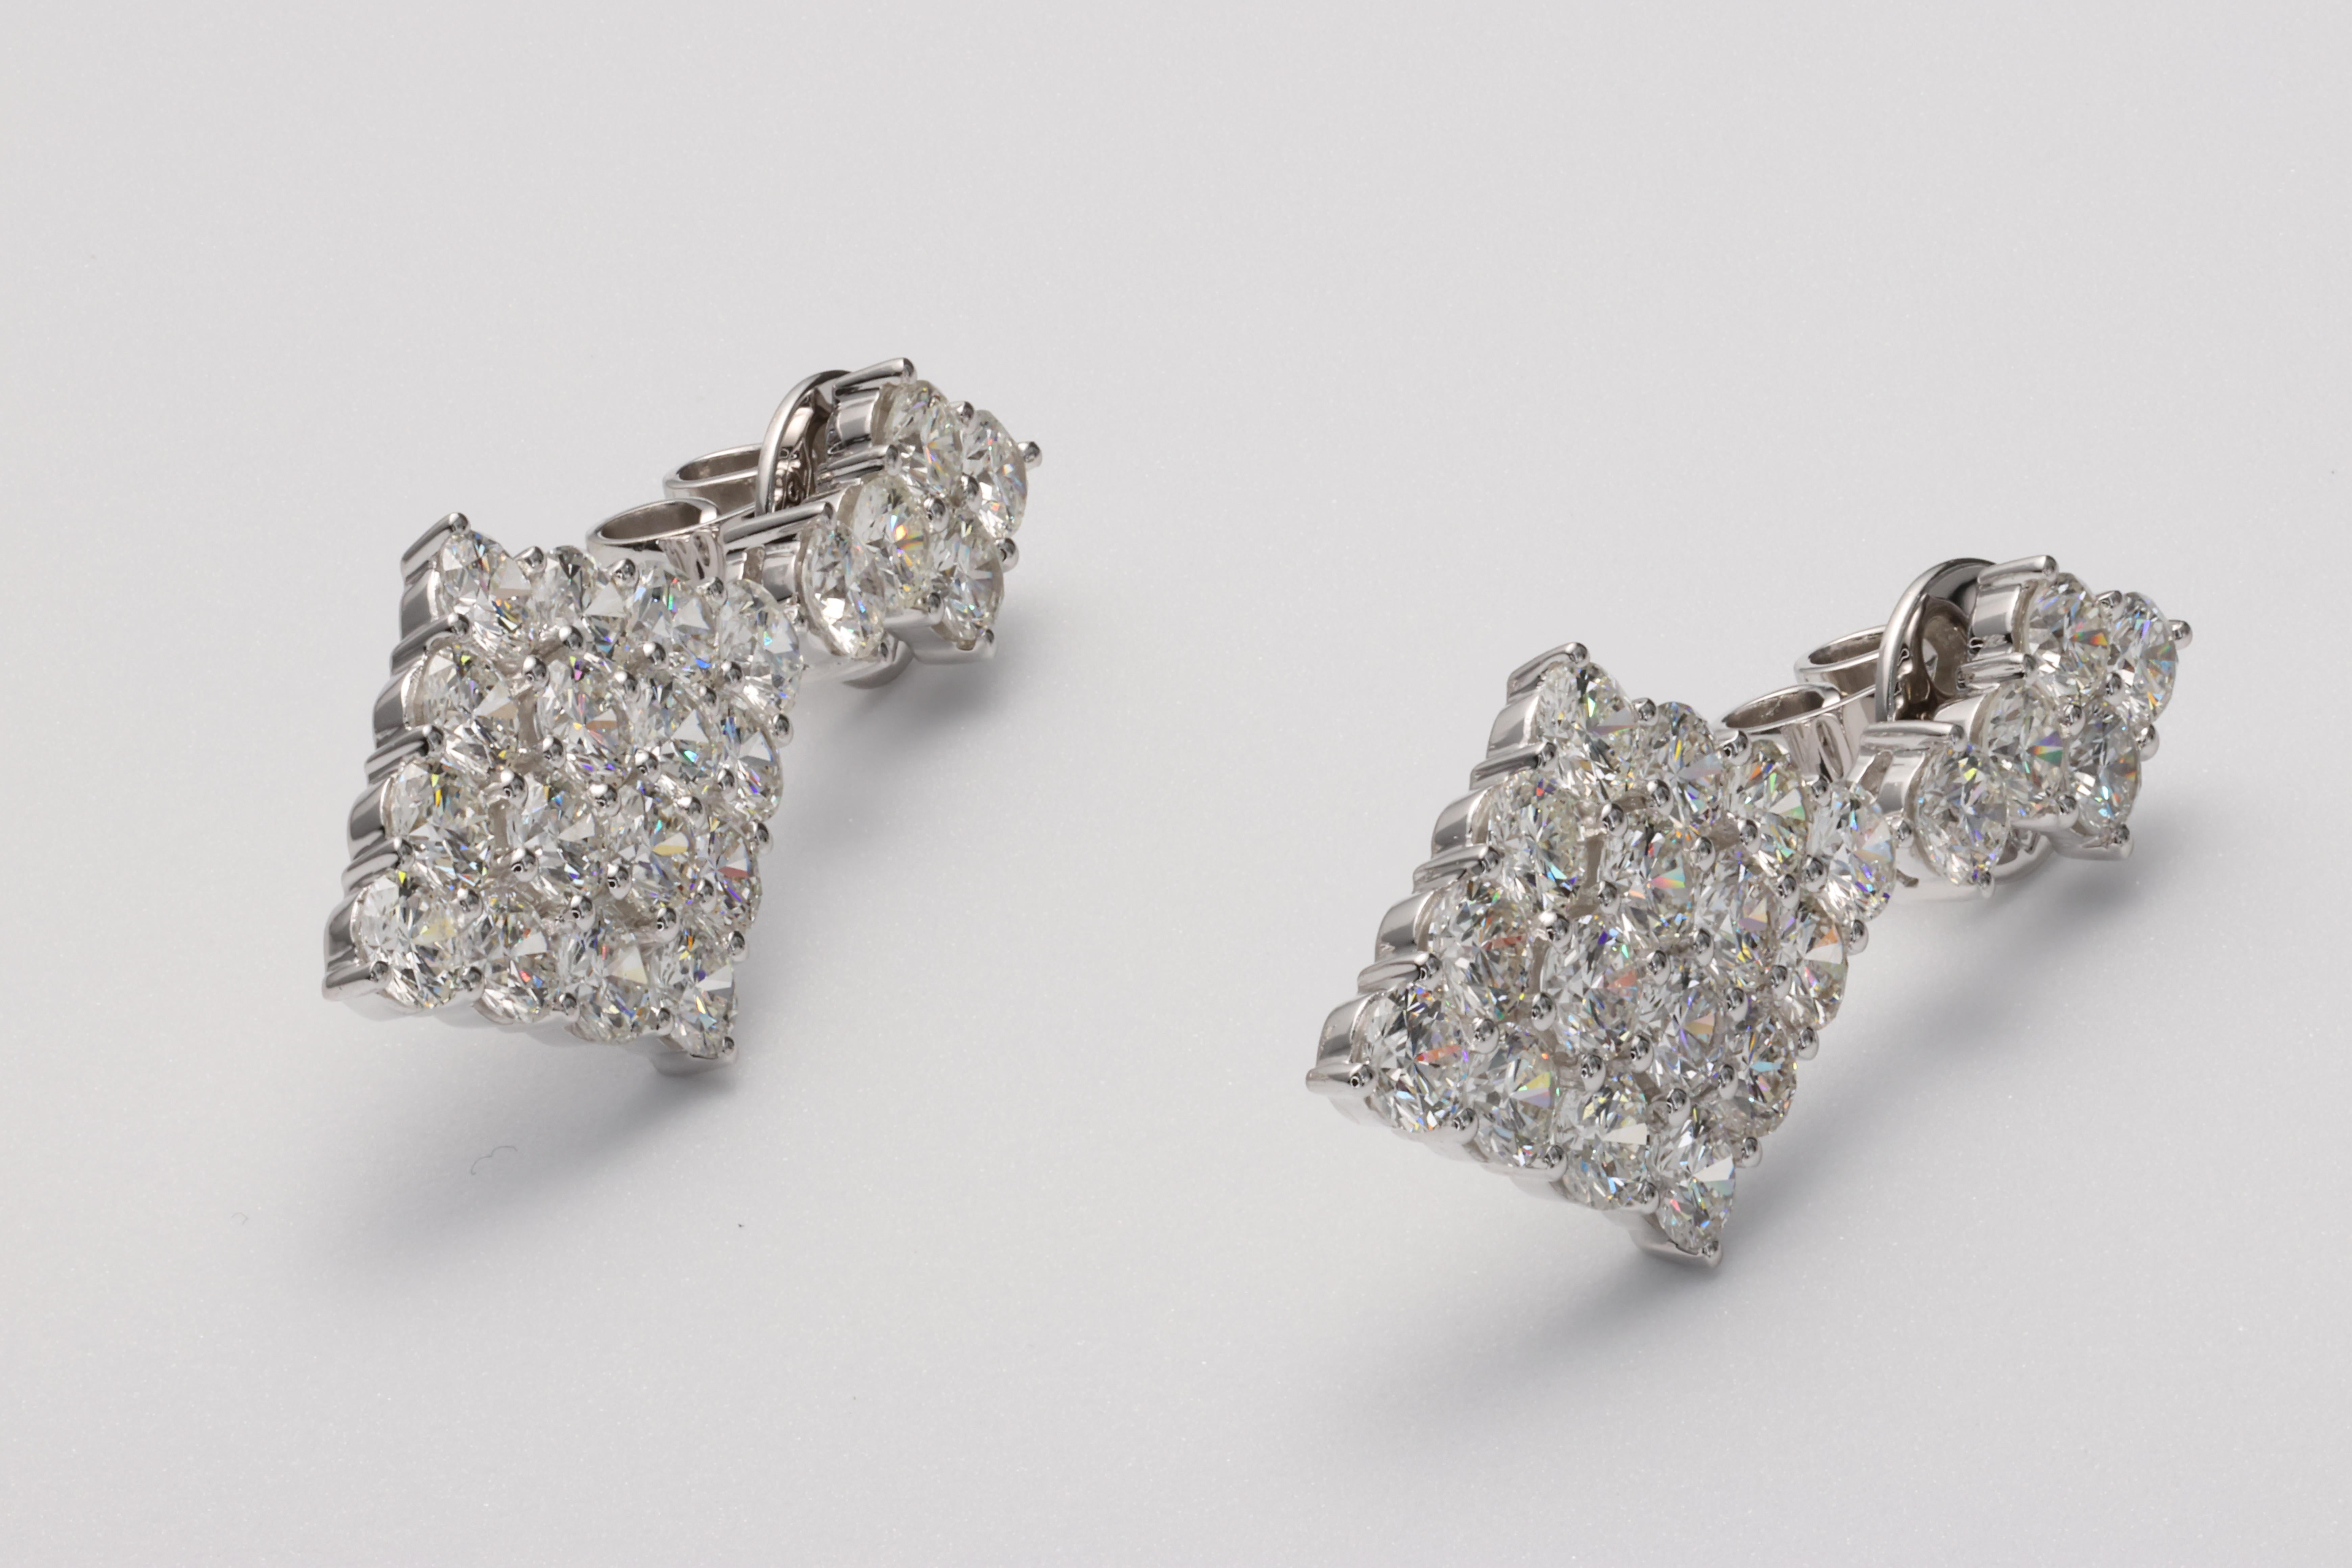 These beautiful kite shape drop earrings are set with approximately 6.22 carats of fine, precision cut and matched round brilliant diamonds that grab attention from across the room. 

The diamonds are F-H in color and VVS-VS clarities with fine